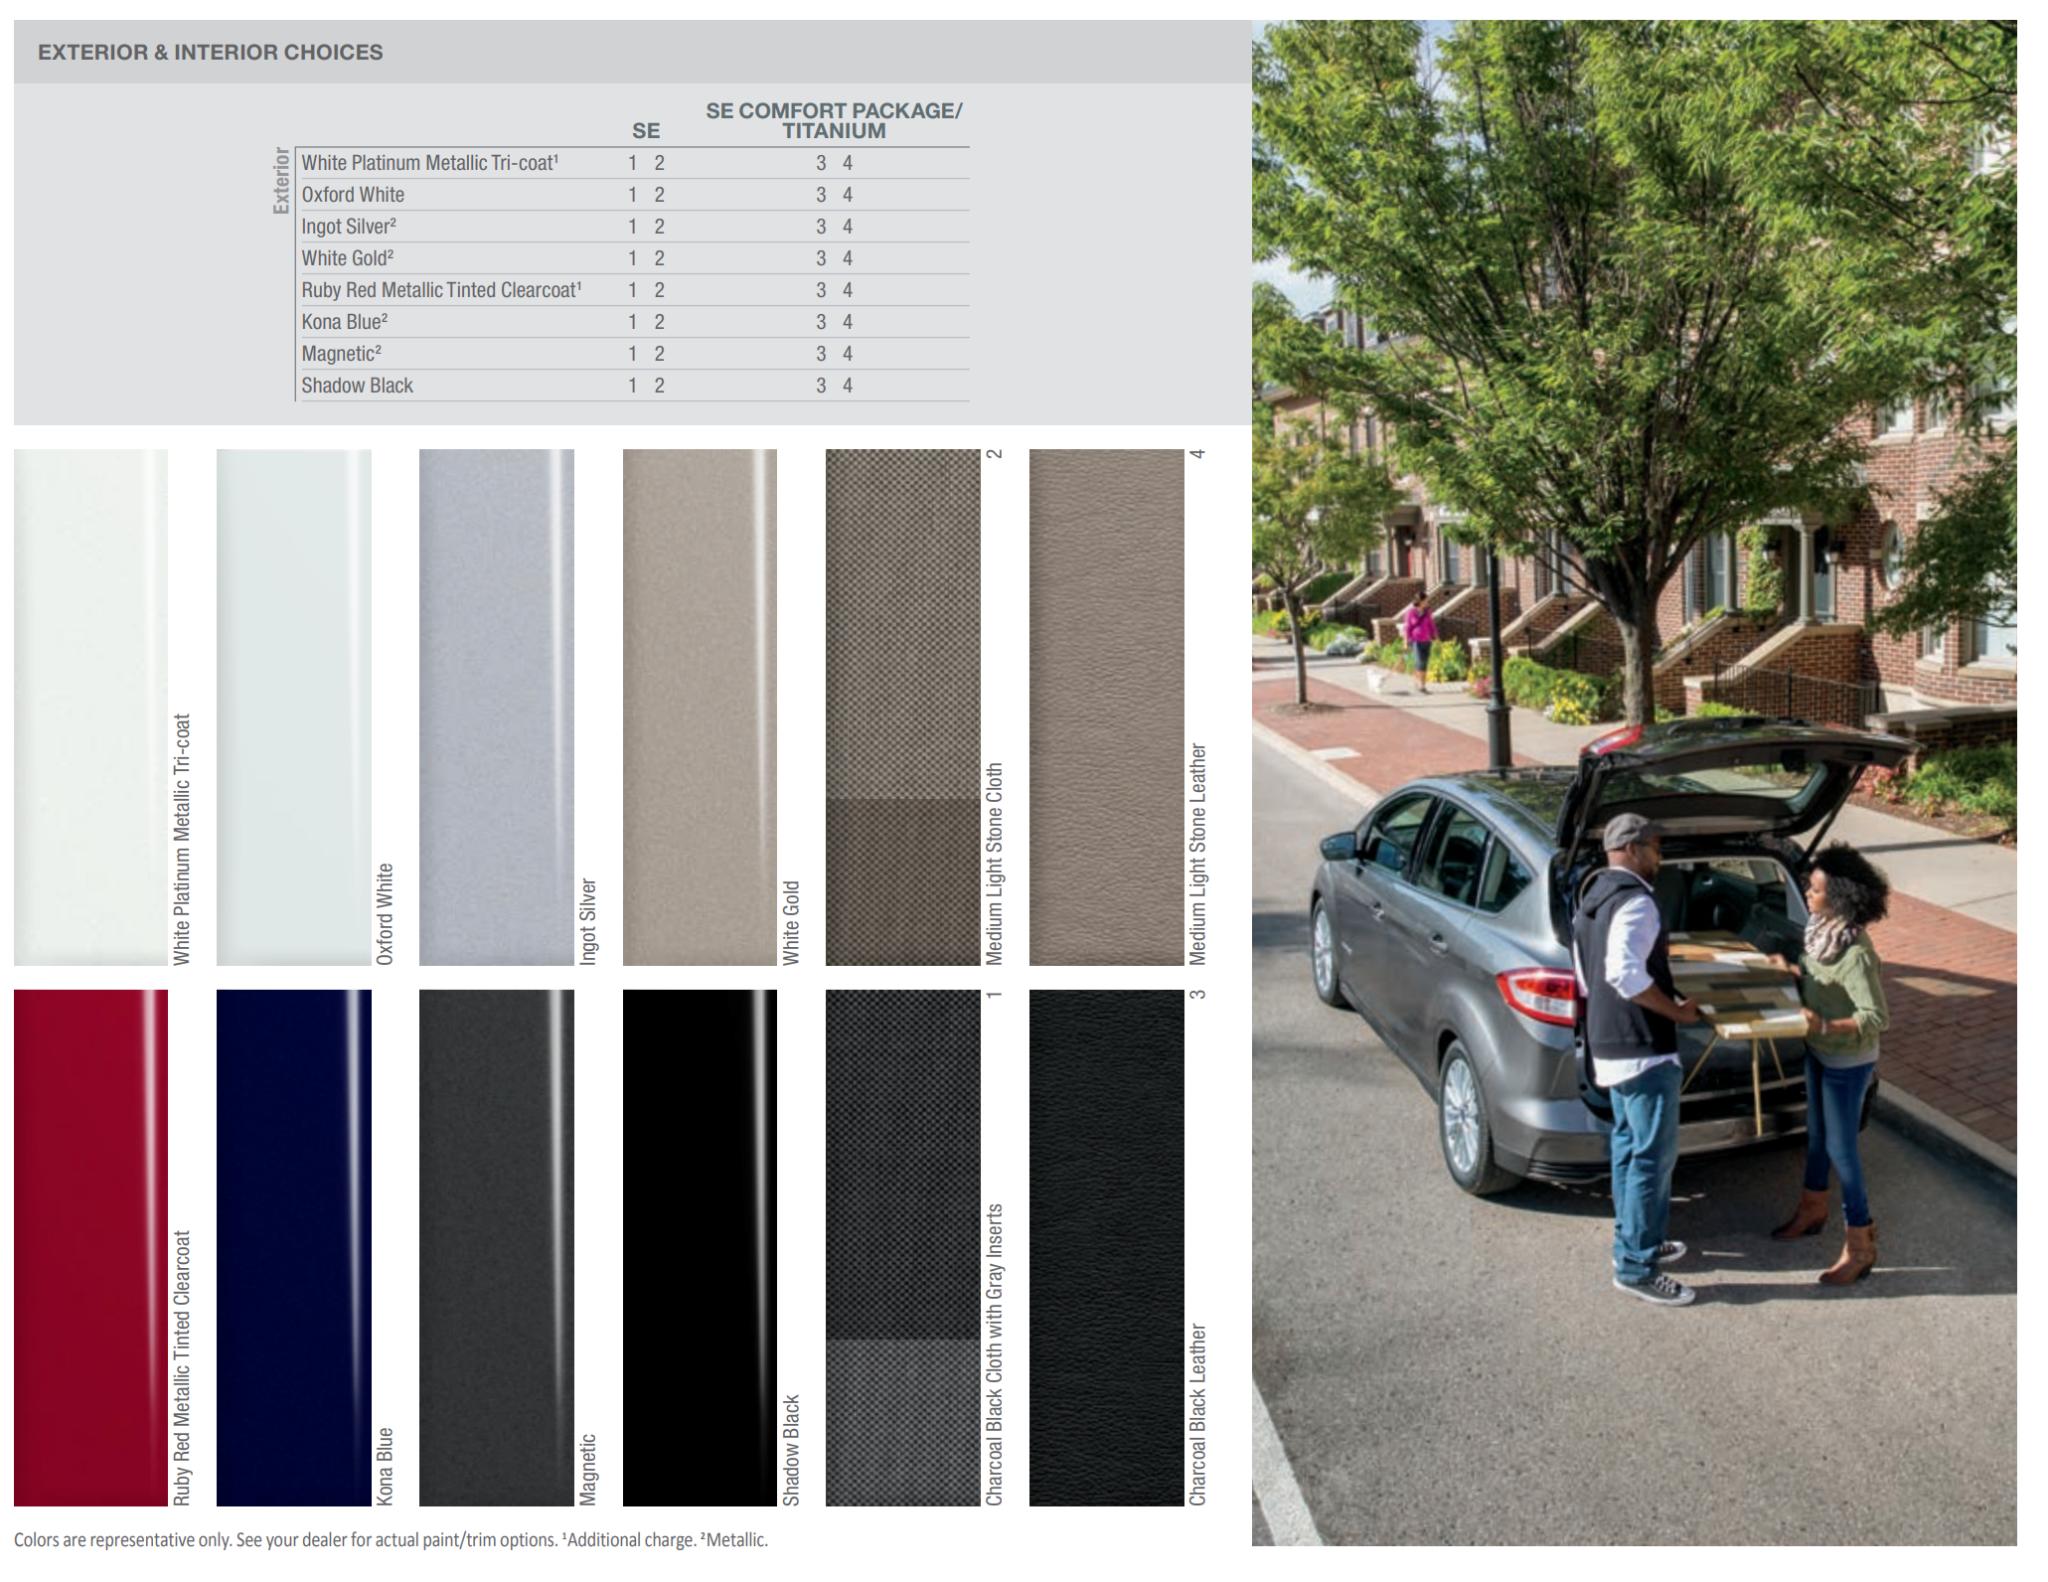 A picture showing exterior and interior paint samples for the 2017 Ford C-max vehicles